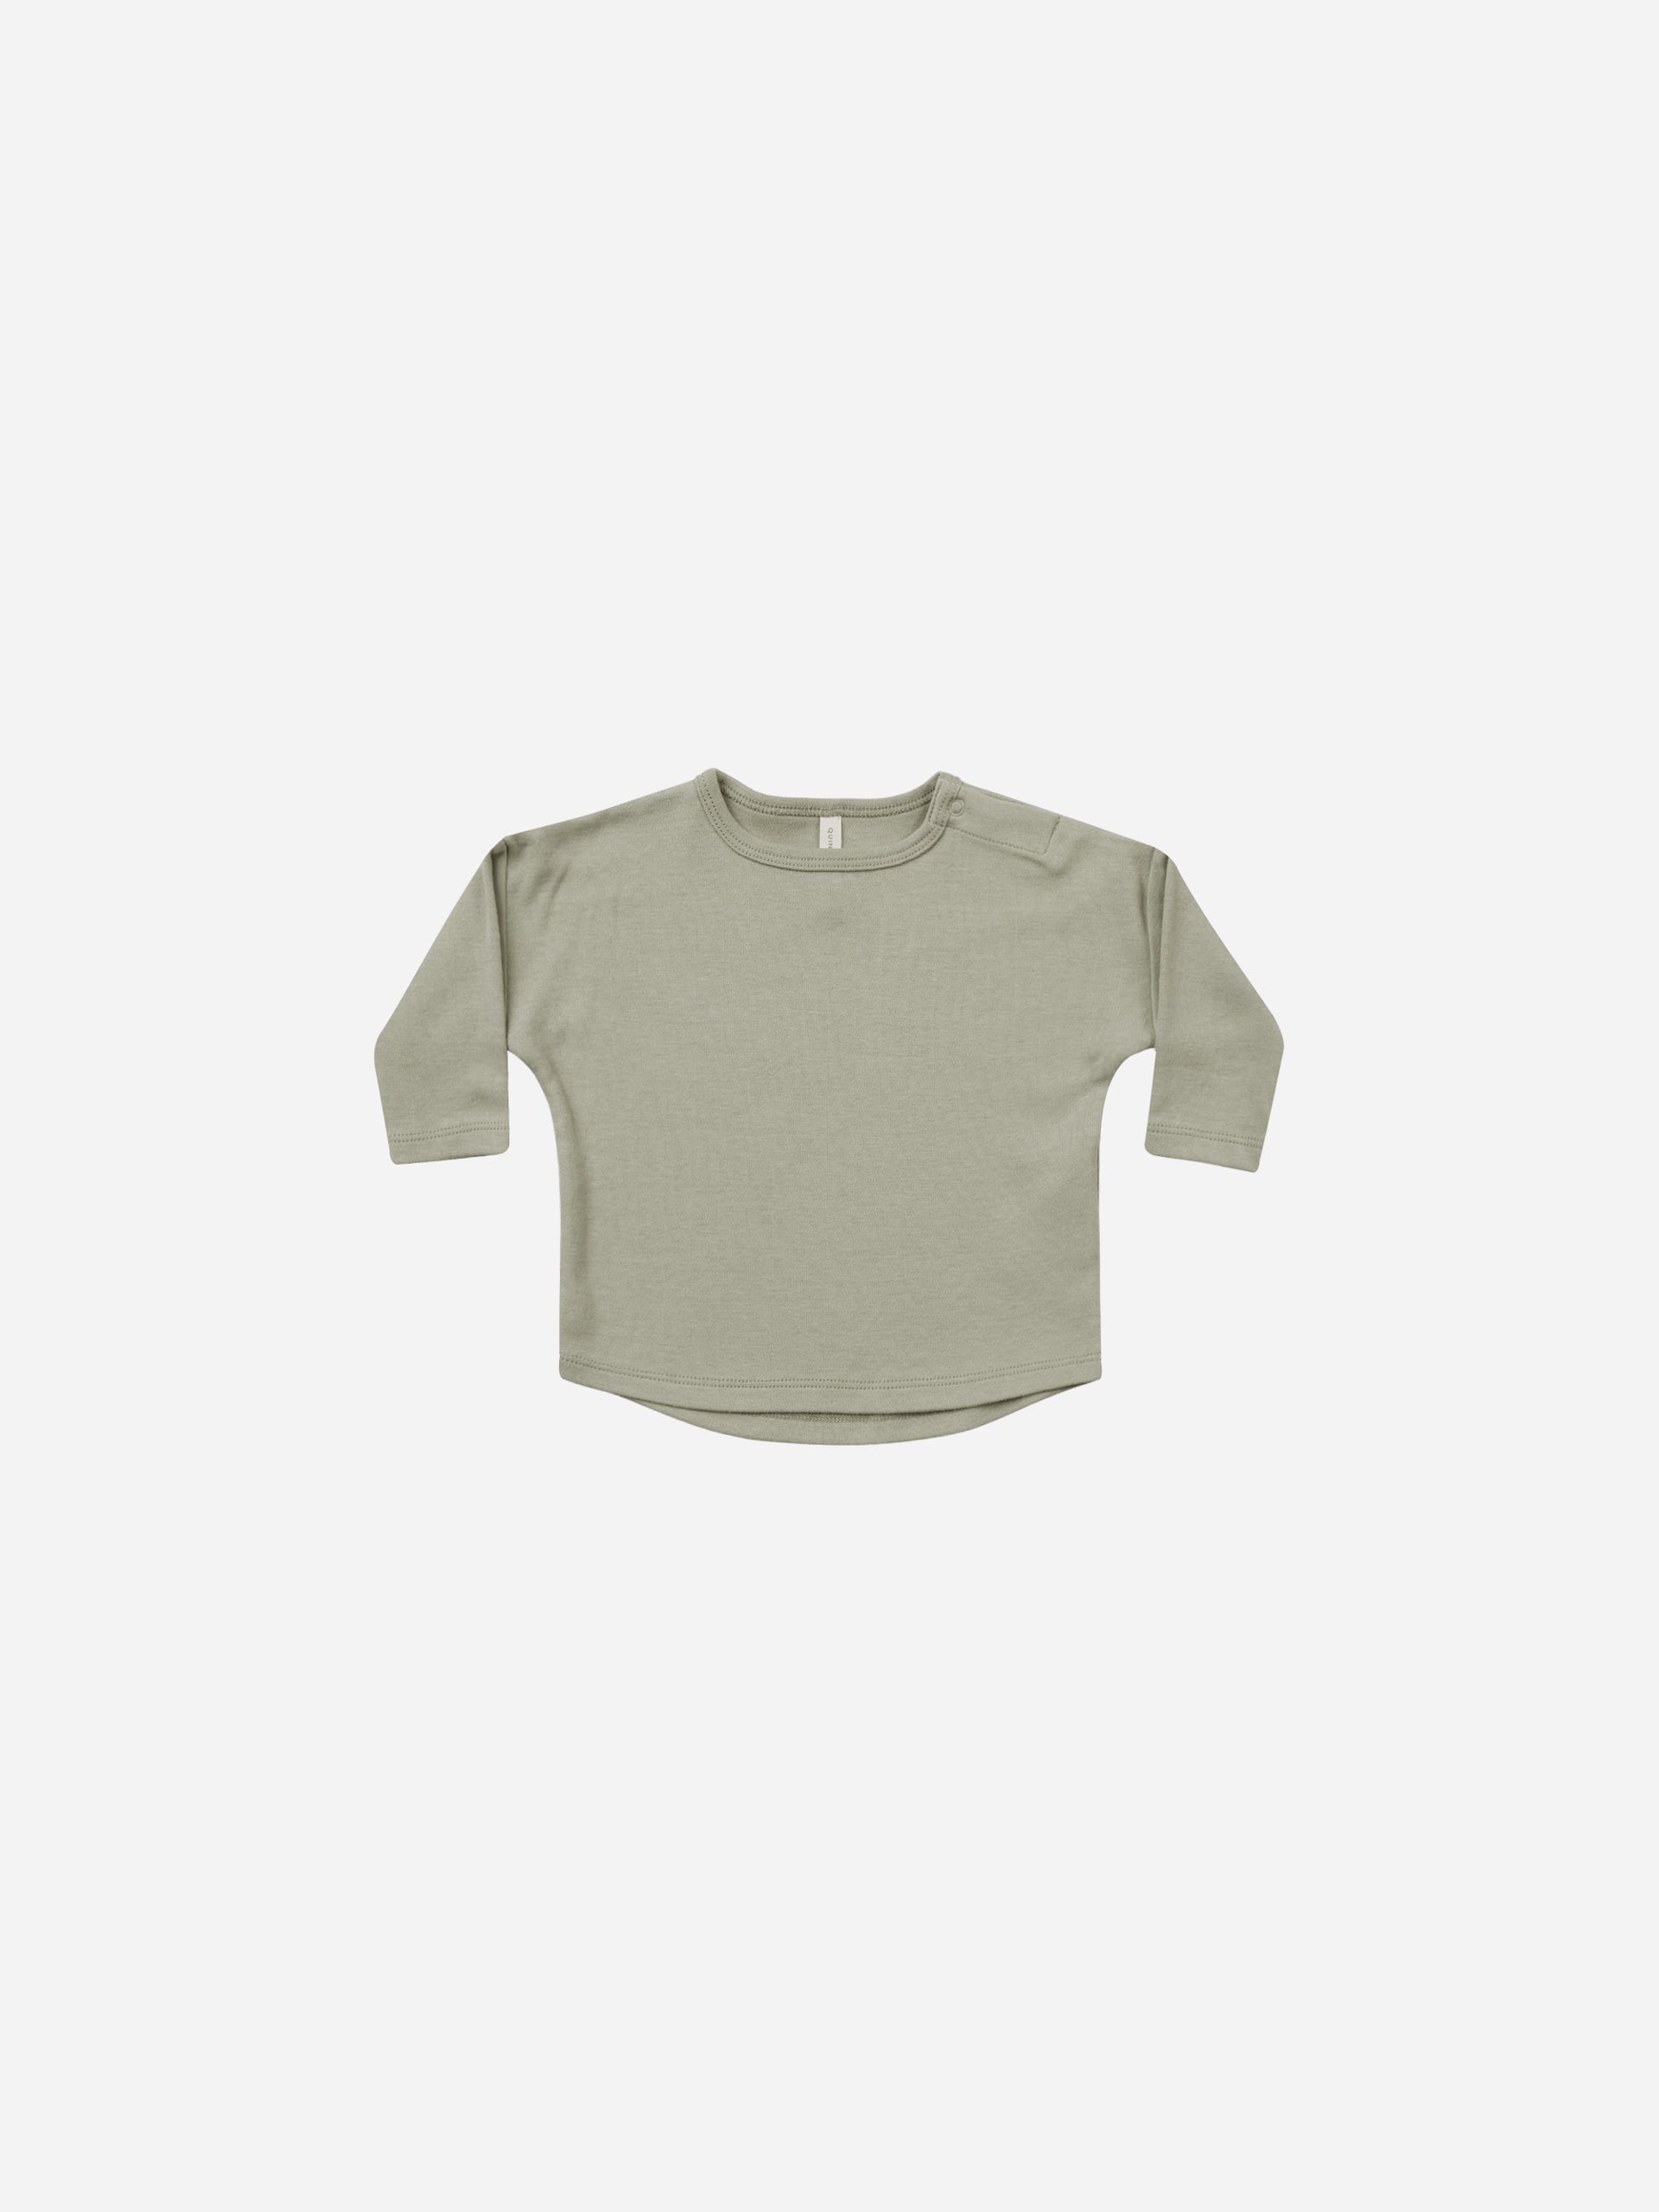 Long Sleeve Tee || Sage - Rylee + Cru | Kids Clothes | Trendy Baby Clothes | Modern Infant Outfits |